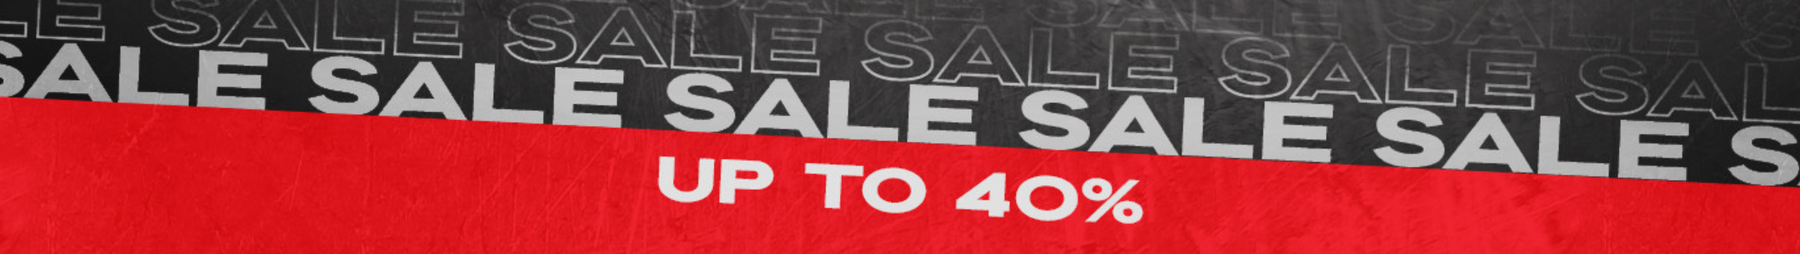 Sale Collection. Up to 40% Off.